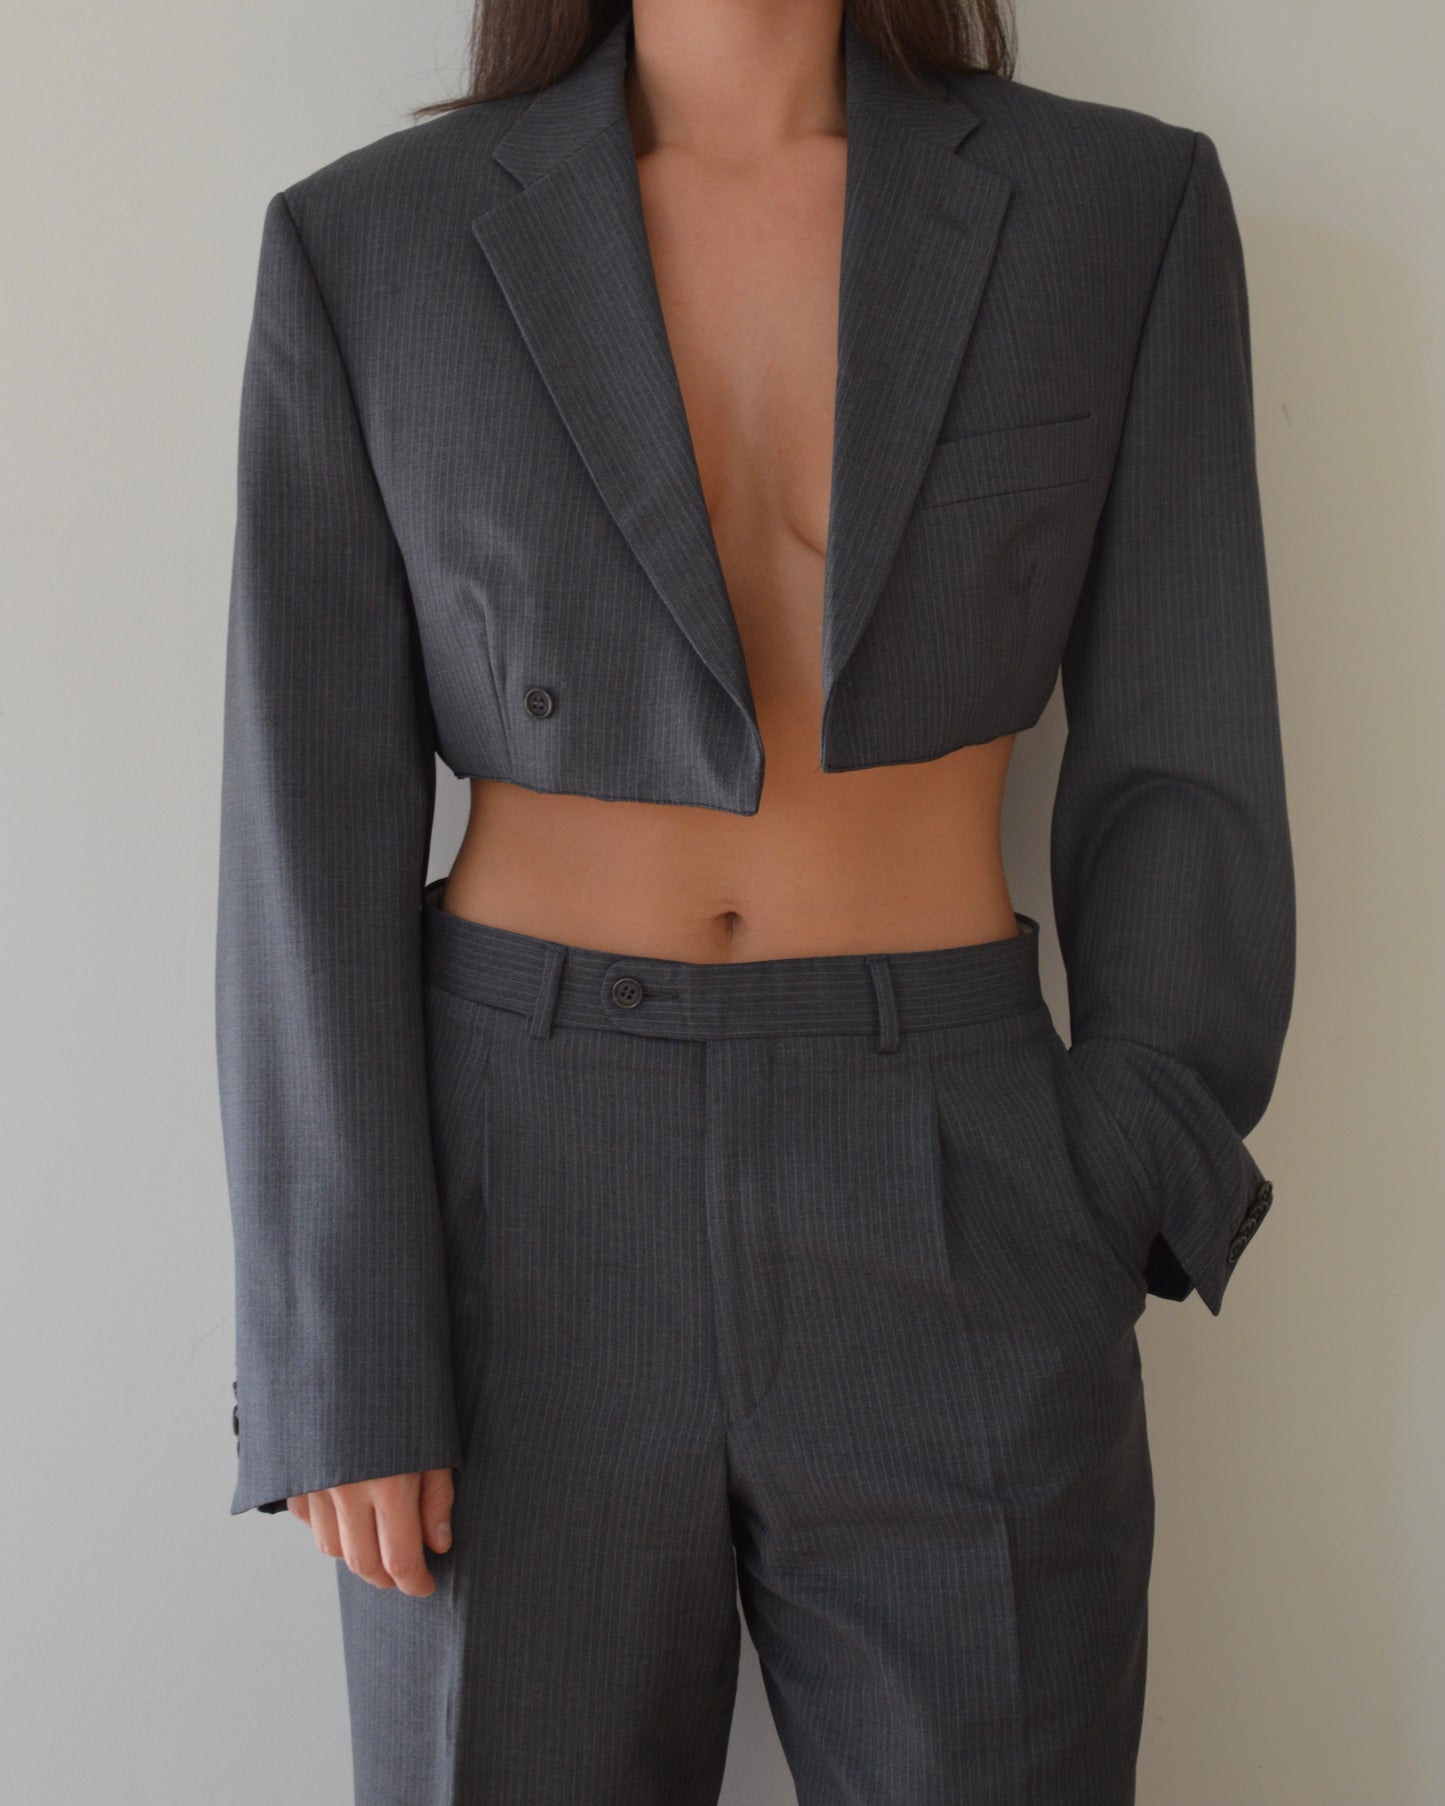 Blaset with trousers - gray blue lines